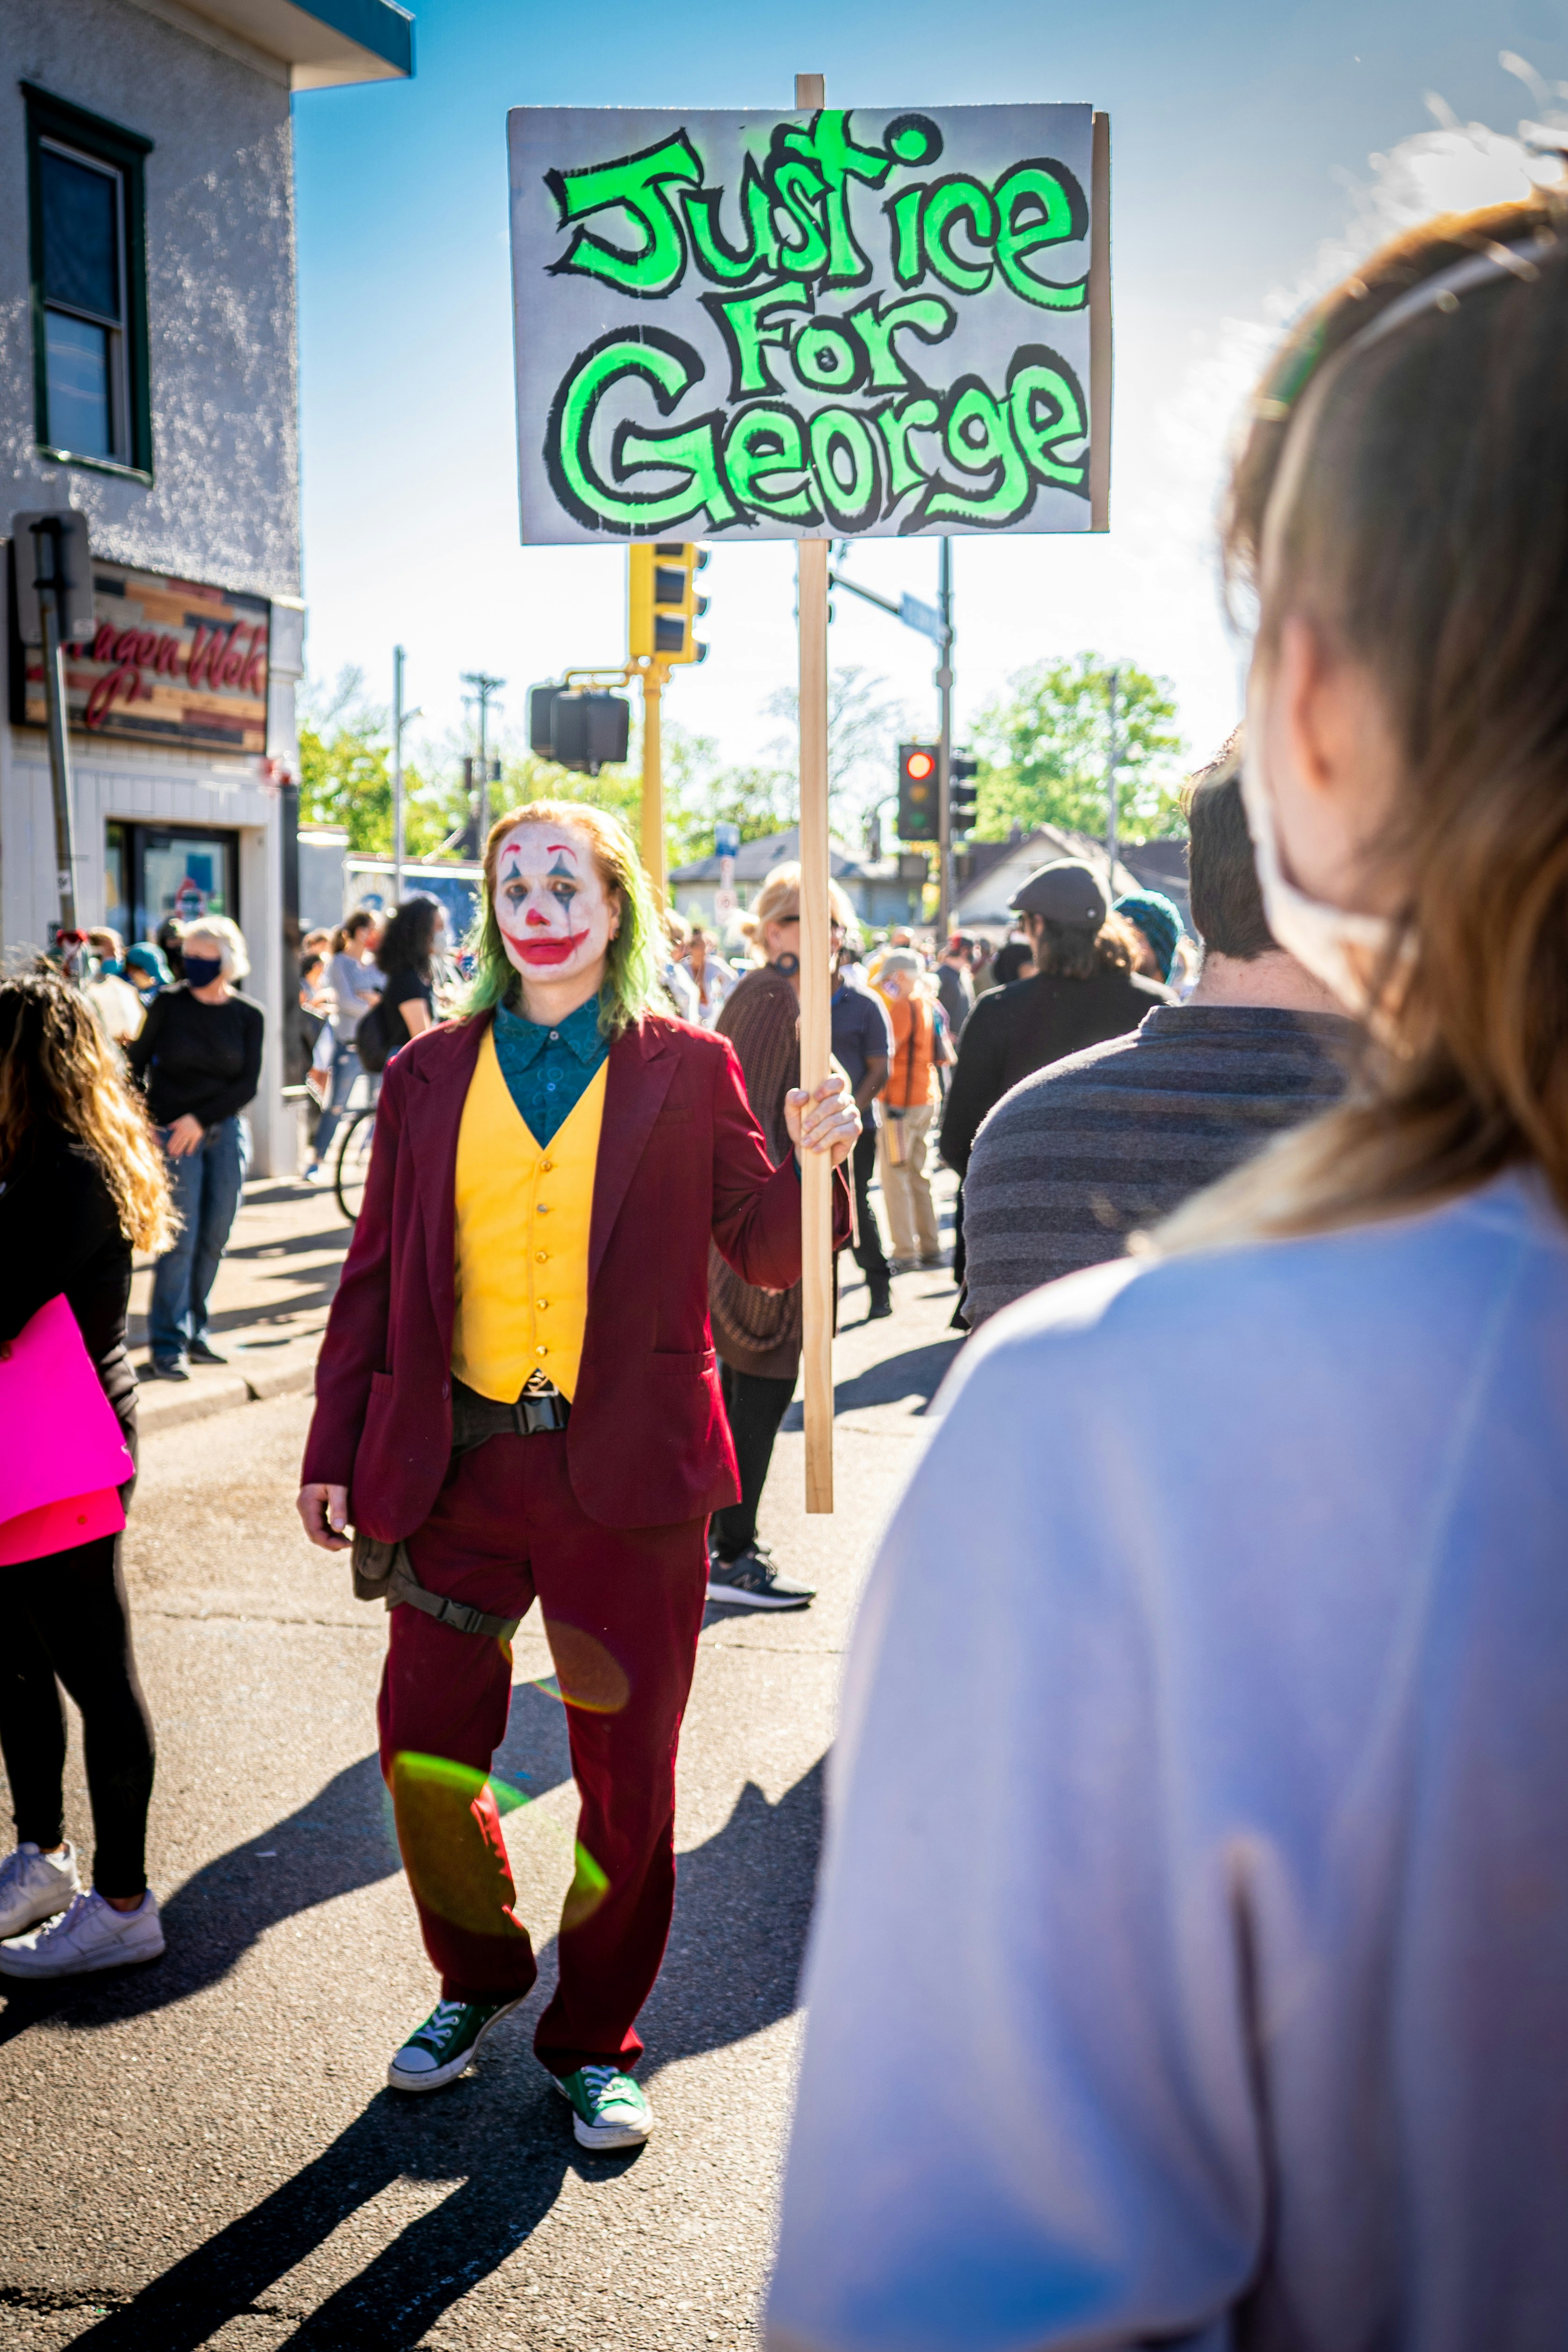 demonstrator in Joker costume from Black Lives Matter protests for George Floyd in Minneapolis riots . . . . . for more editorial photos: http://www.shutterstock.com/g/MUNSHOTS?rid=267047586